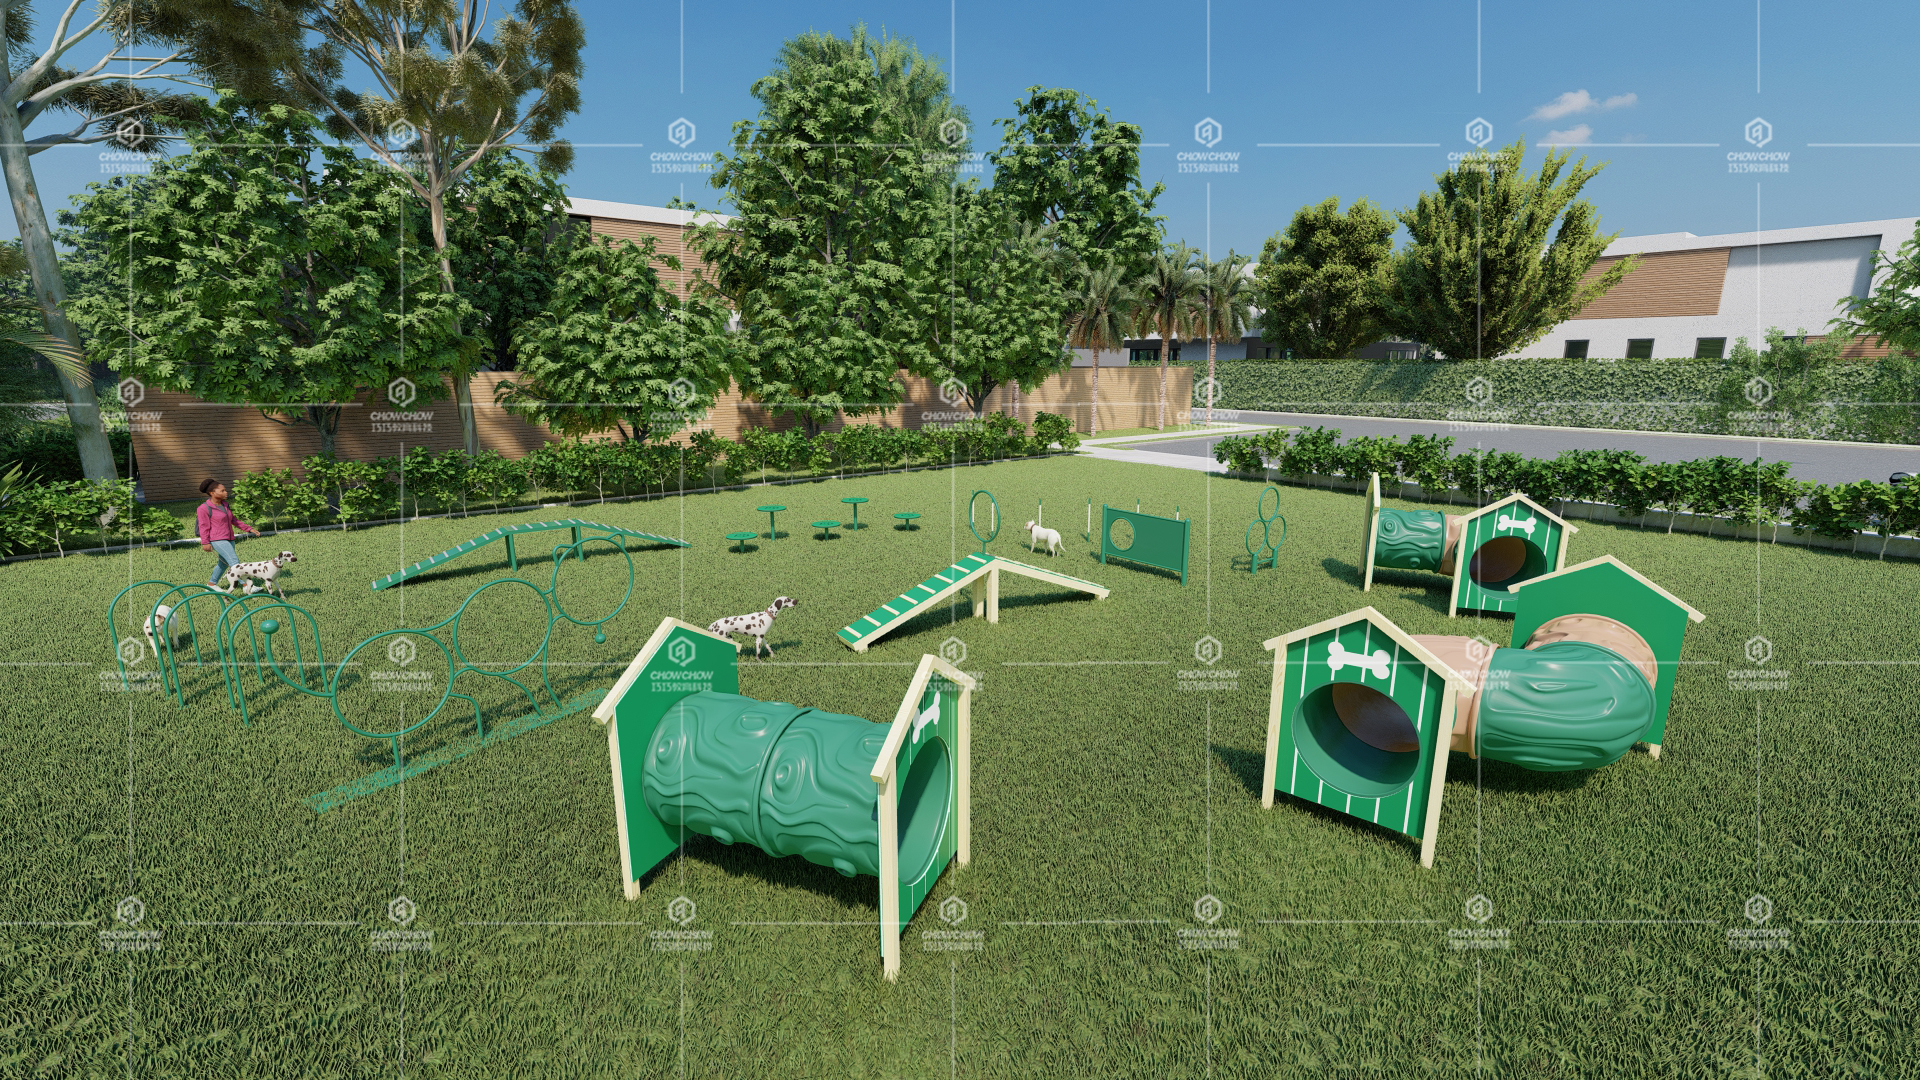 How To Build A Safe And Comfortable Playground for Dogs